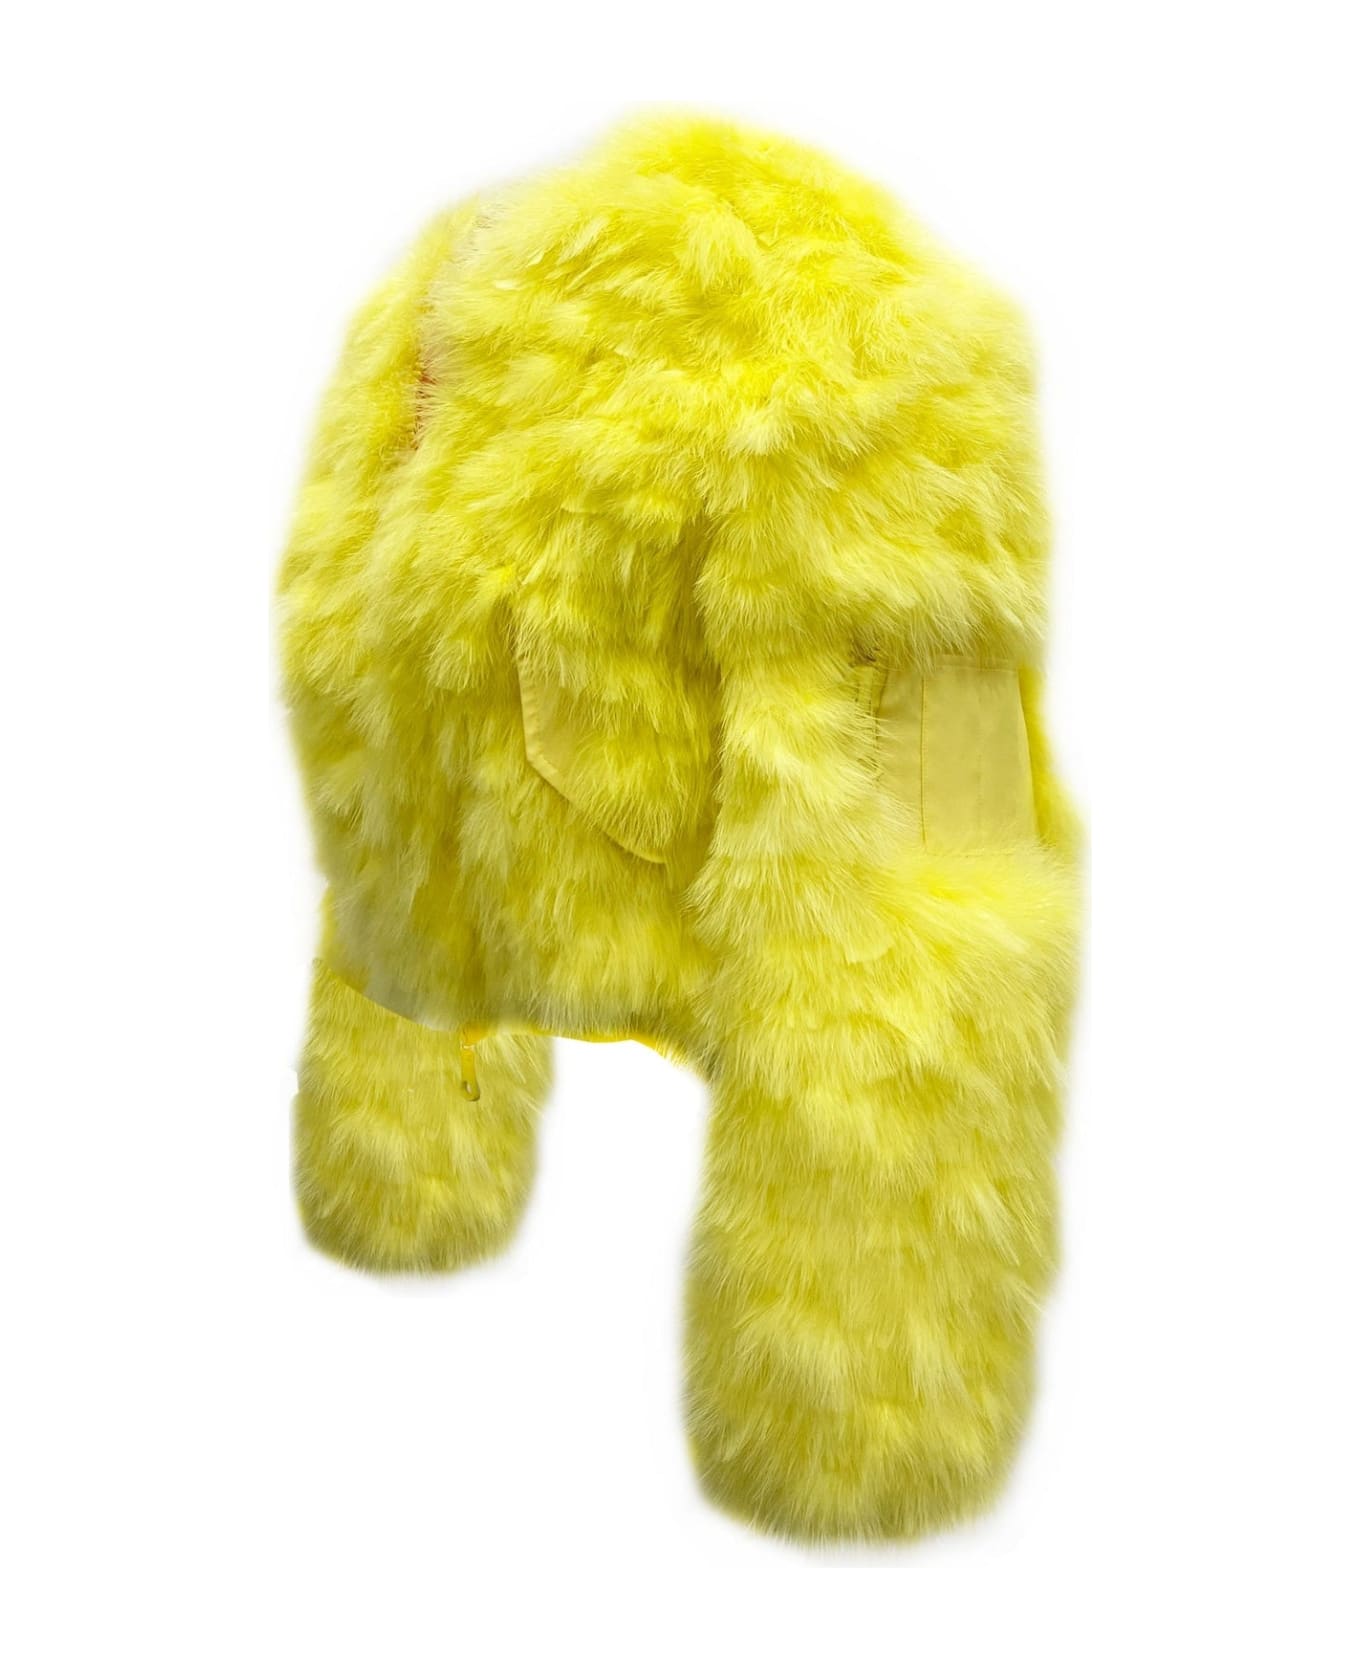 Dsquared2 Feathers Bomber Jacket - Yellow